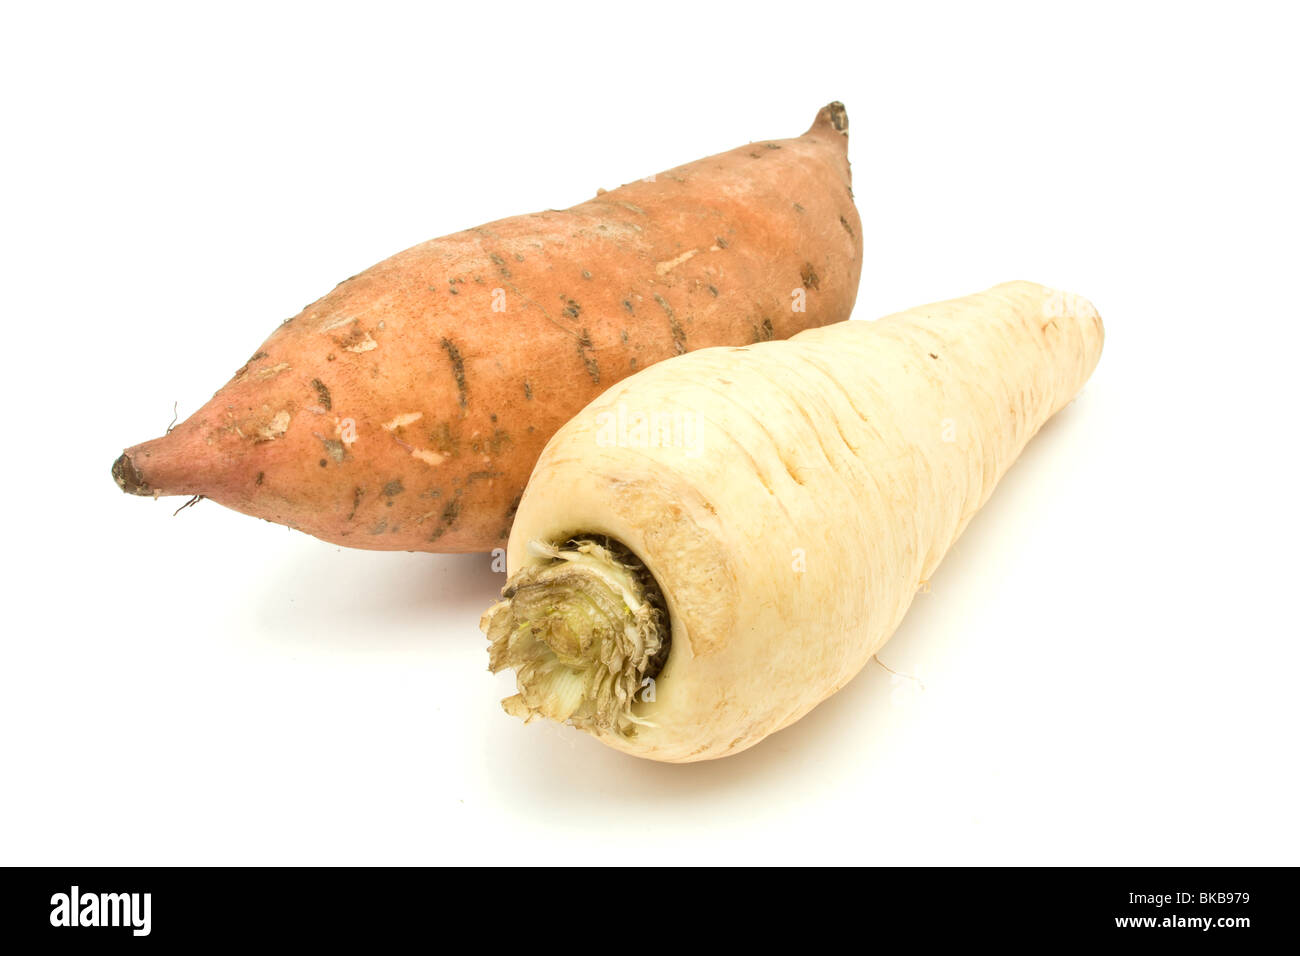 Root Vegetables of parsnip and sweet potato isolated agaginst white background. Stock Photo